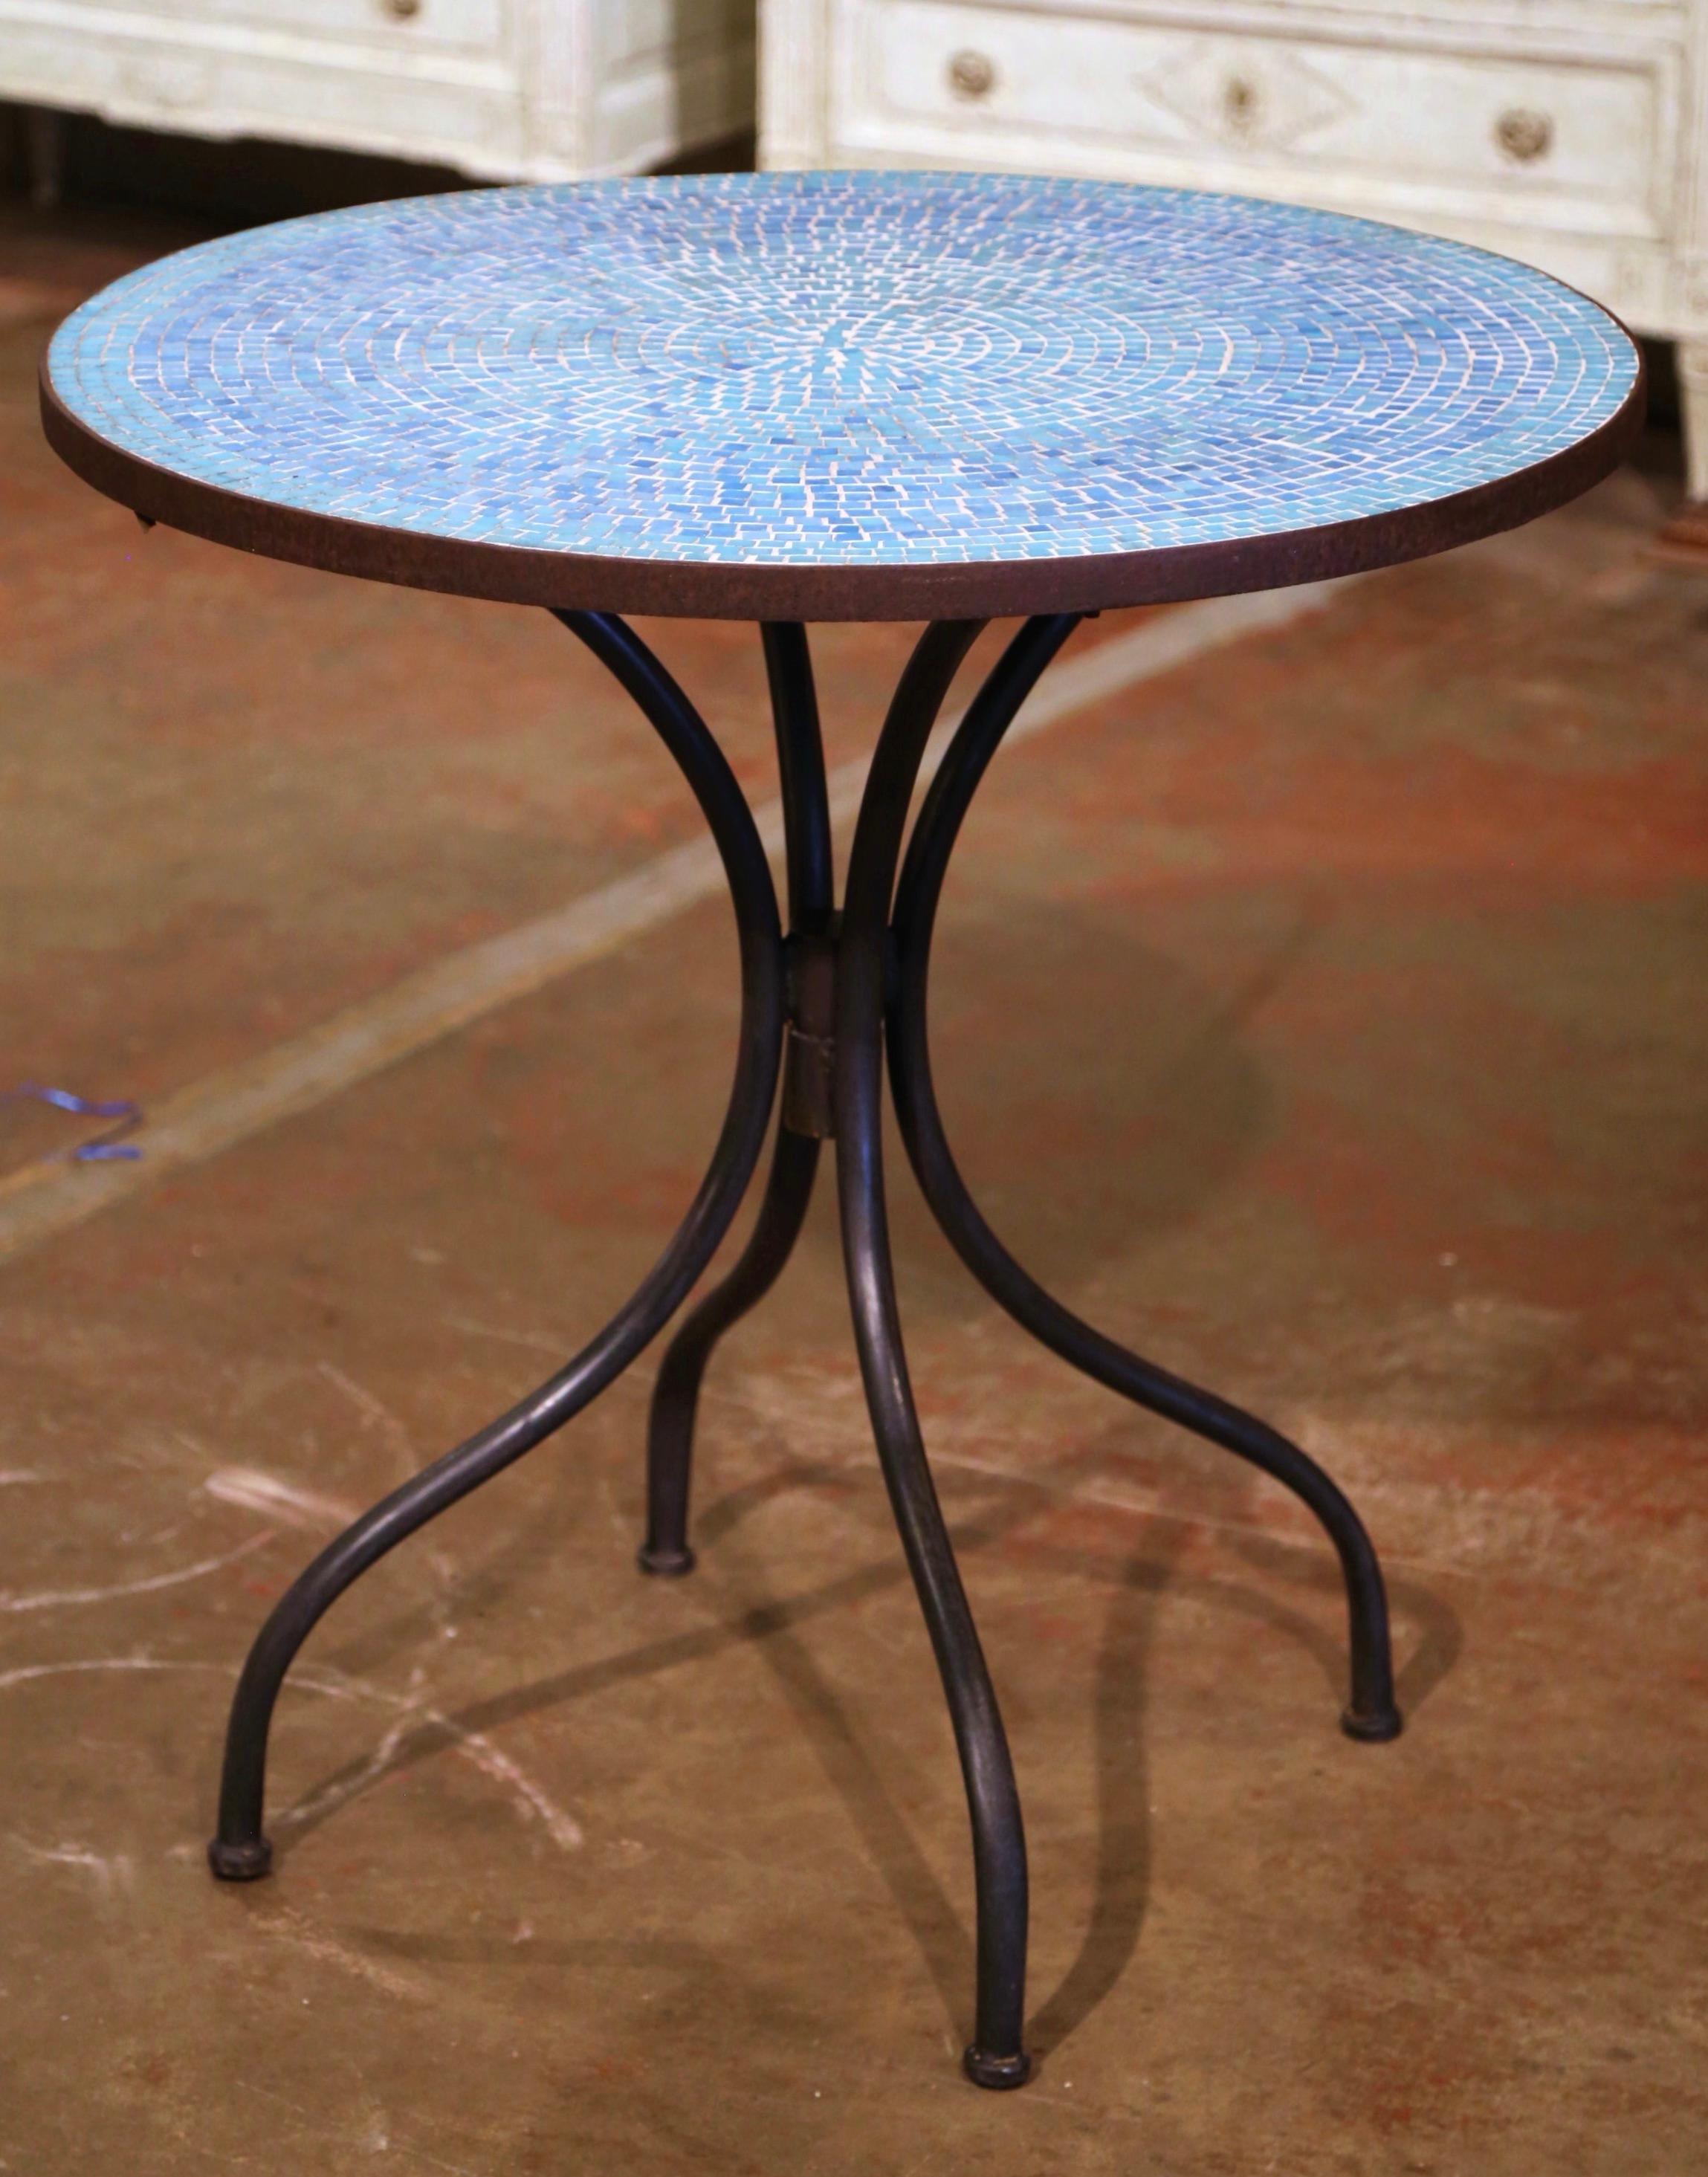 Hand-Crafted Early 20th Century Parisian Iron Bistrot Table with Mosaic Tile Top